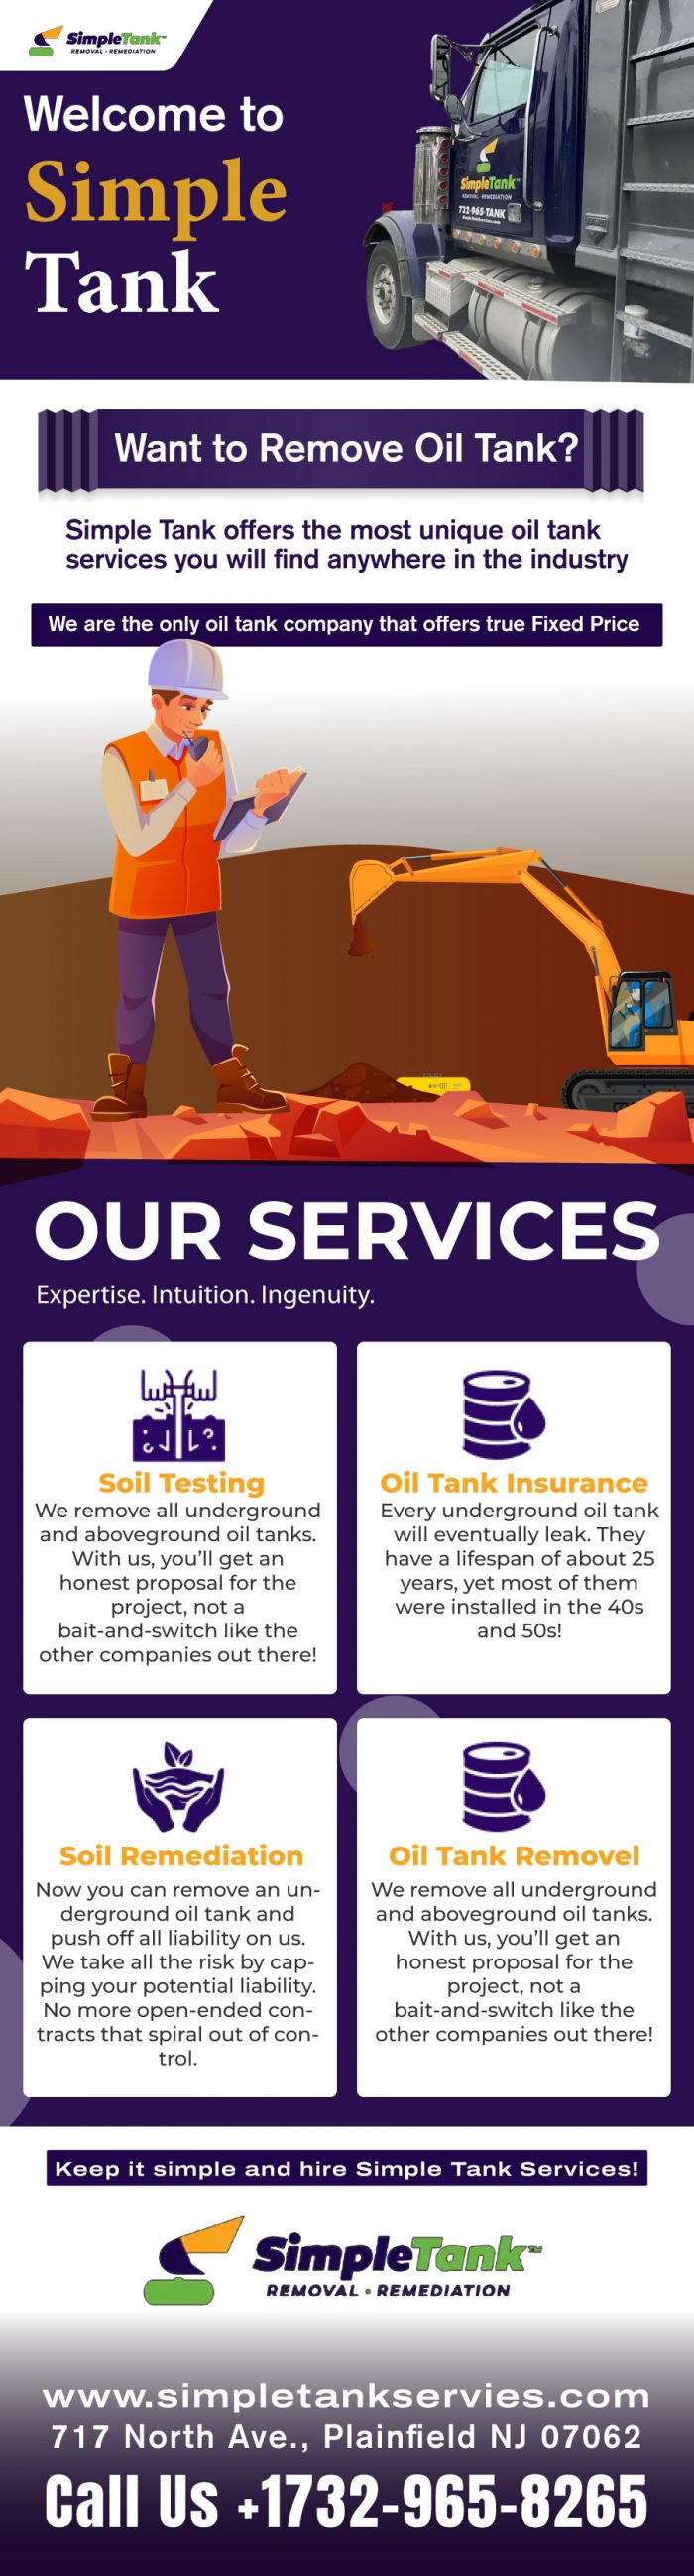 Oil Tank Removal NJ: Safeguarding Your Property and the Environment